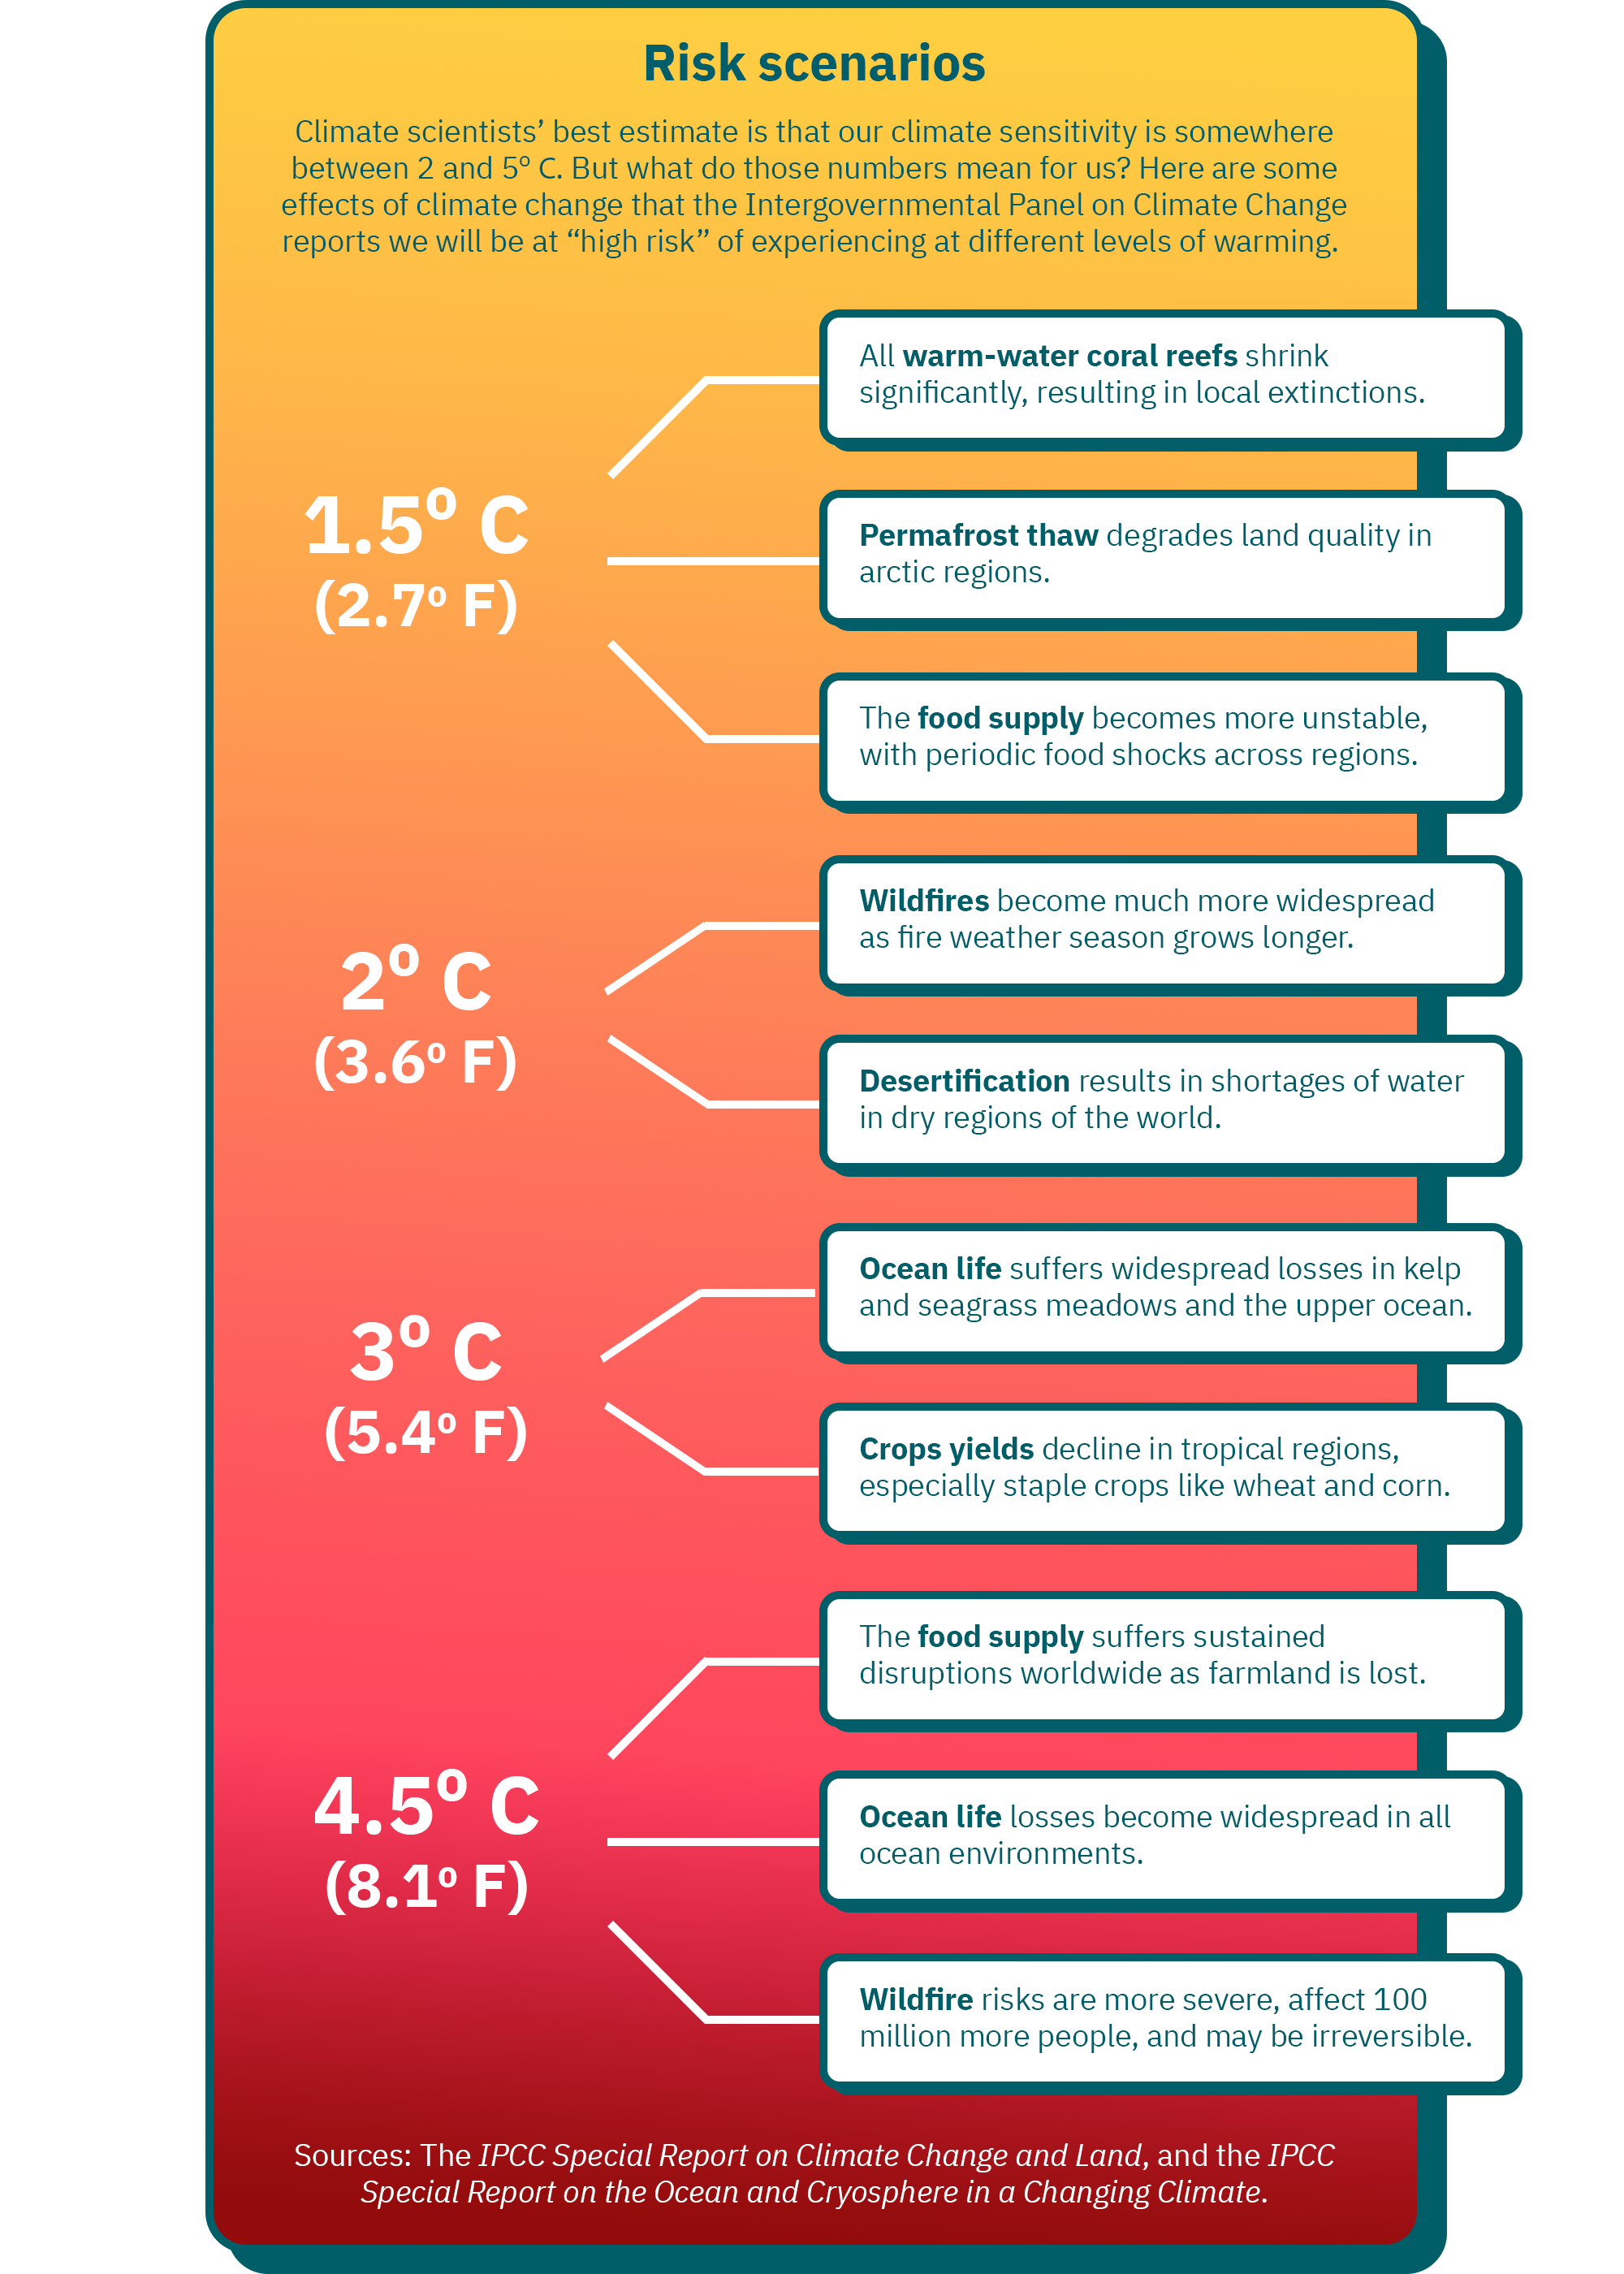 Infographic: Risk scenarios. Climate scientists’ best estimate is that our climate sensitivity is somewhere between 1.5 and 4.5o C. But what do those numbers mean for us? Here are some effects of climate change that the Intergovernmental Panel on Climate Change reports we will be at “high risk” of experiencing at different levels of warming. Sources: The IPCC Special Report on Climate Change and Land, and the IPCC Special Report on the Ocean and Cryosphere in a Changing Climate.